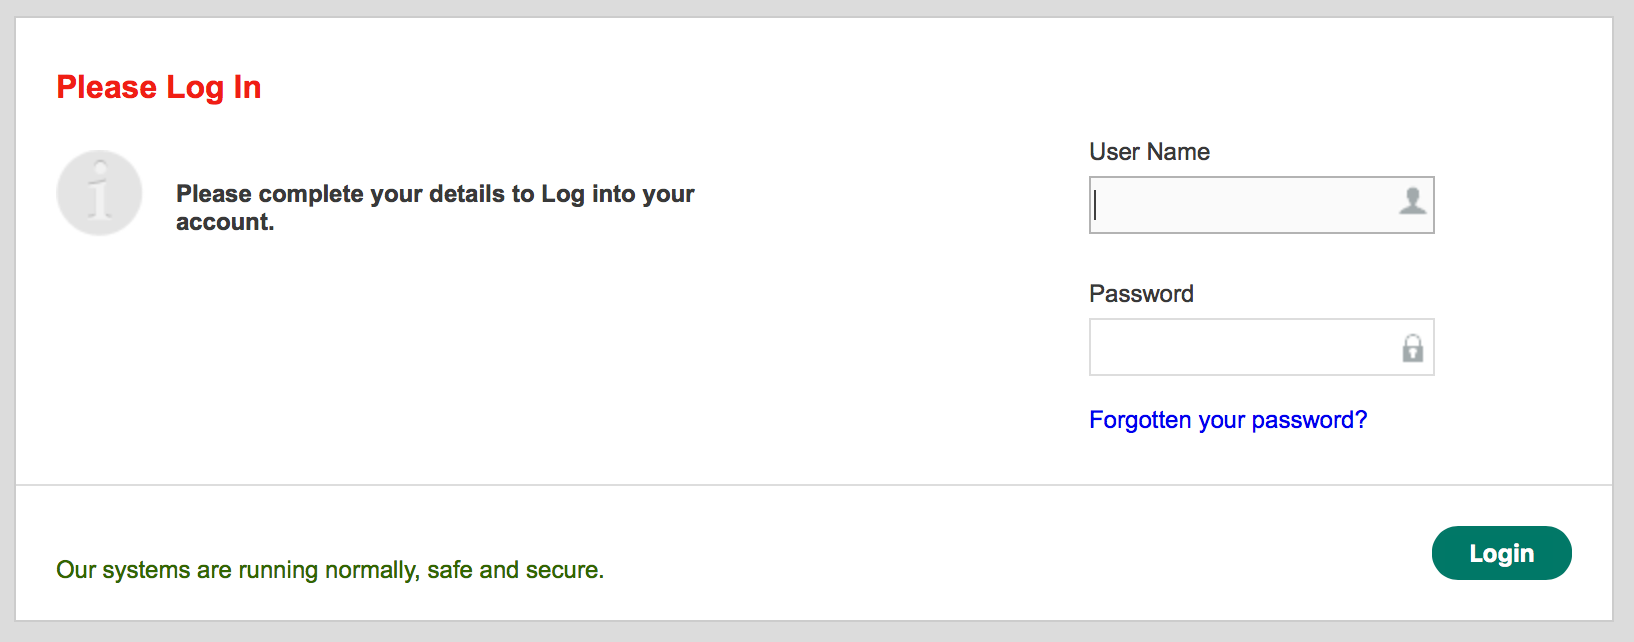 Login with your username and password